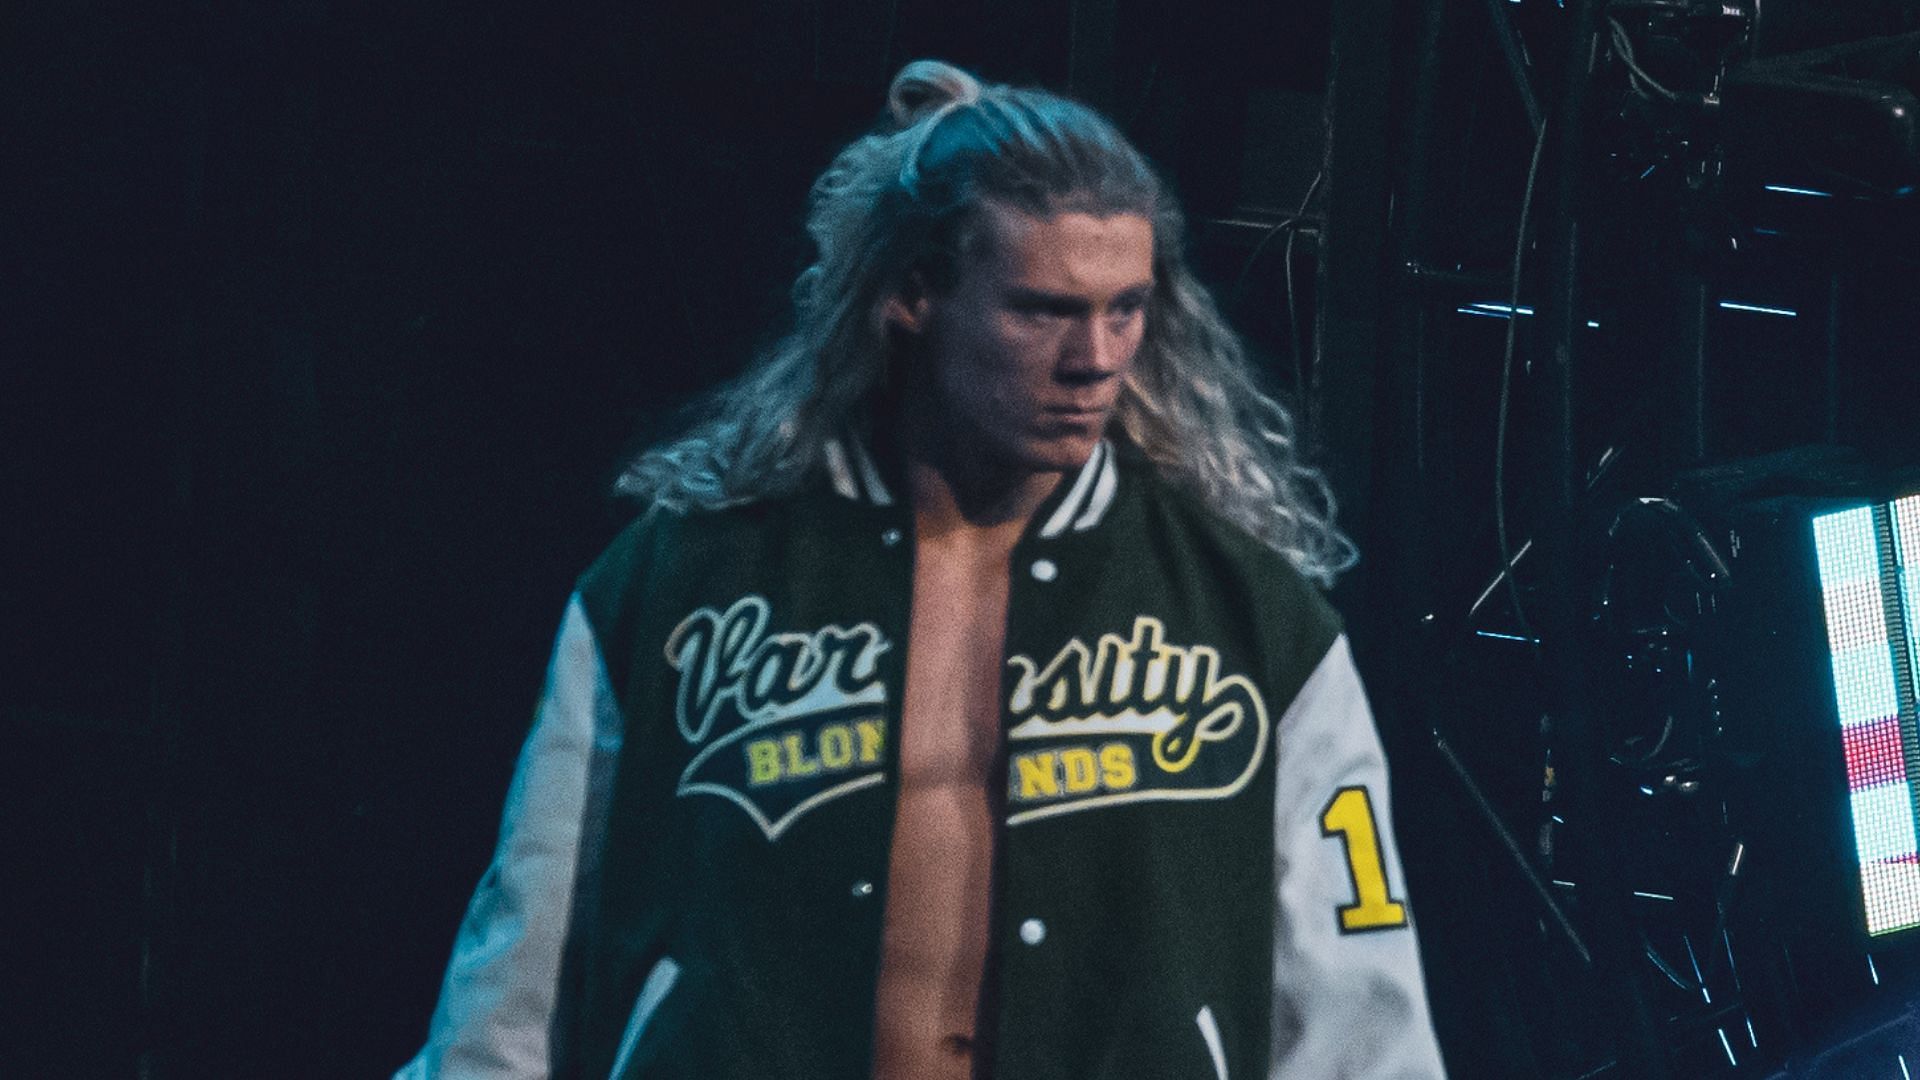 Griff Garrison at an AEW event in 2022 (credit: Jay Lee Photography)